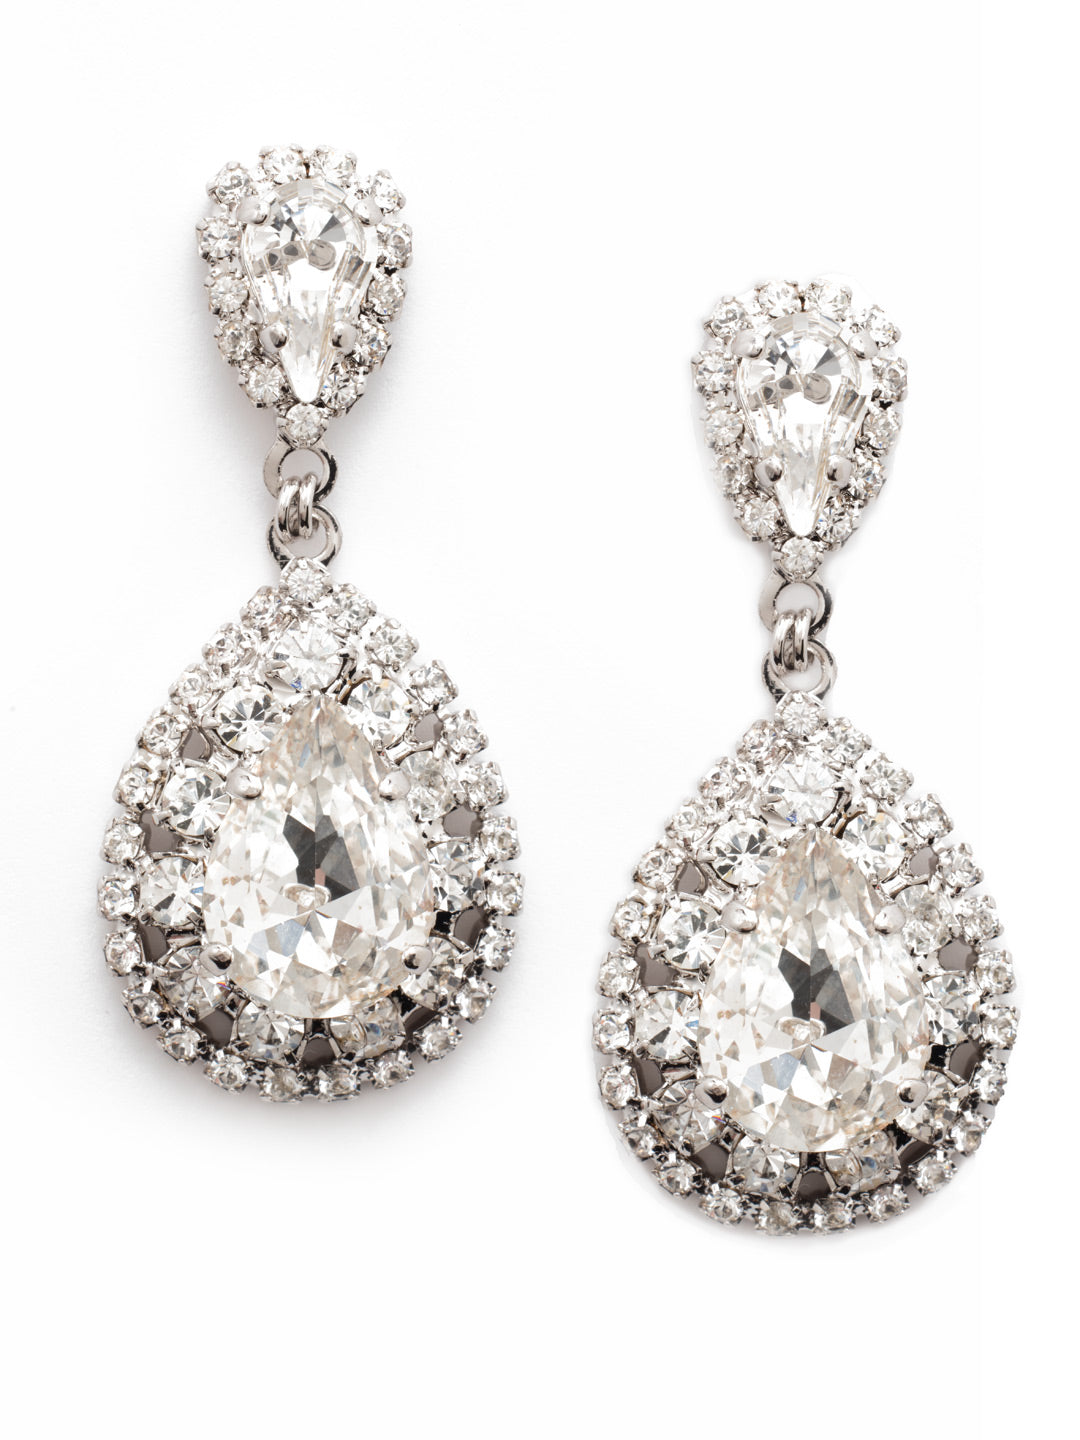 Oval Encrusted Crystal Dangle Earrings - ECW47RHCRY - <p>These oval earrings will pair perfectly with that classic updo! Teardrop crystals are the center of this brilliant statement earring. From Sorrelli's Crystal collection in our Palladium Silver-tone finish.</p>